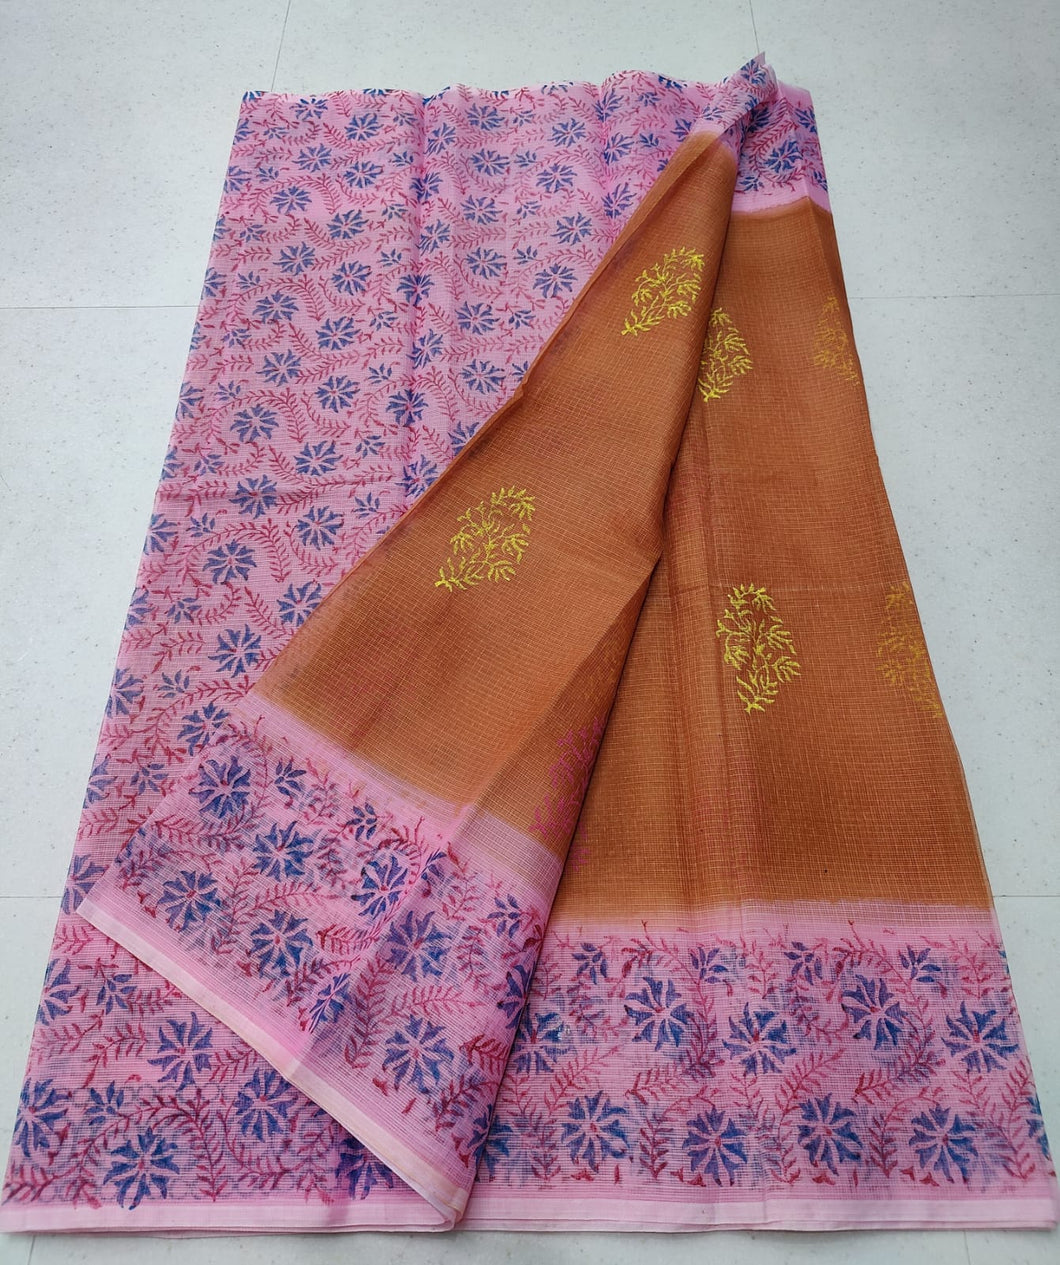 Exquisite Brown With Pink Colored KotaDoria Die Block Printed Cotton Saree With Running Blouse